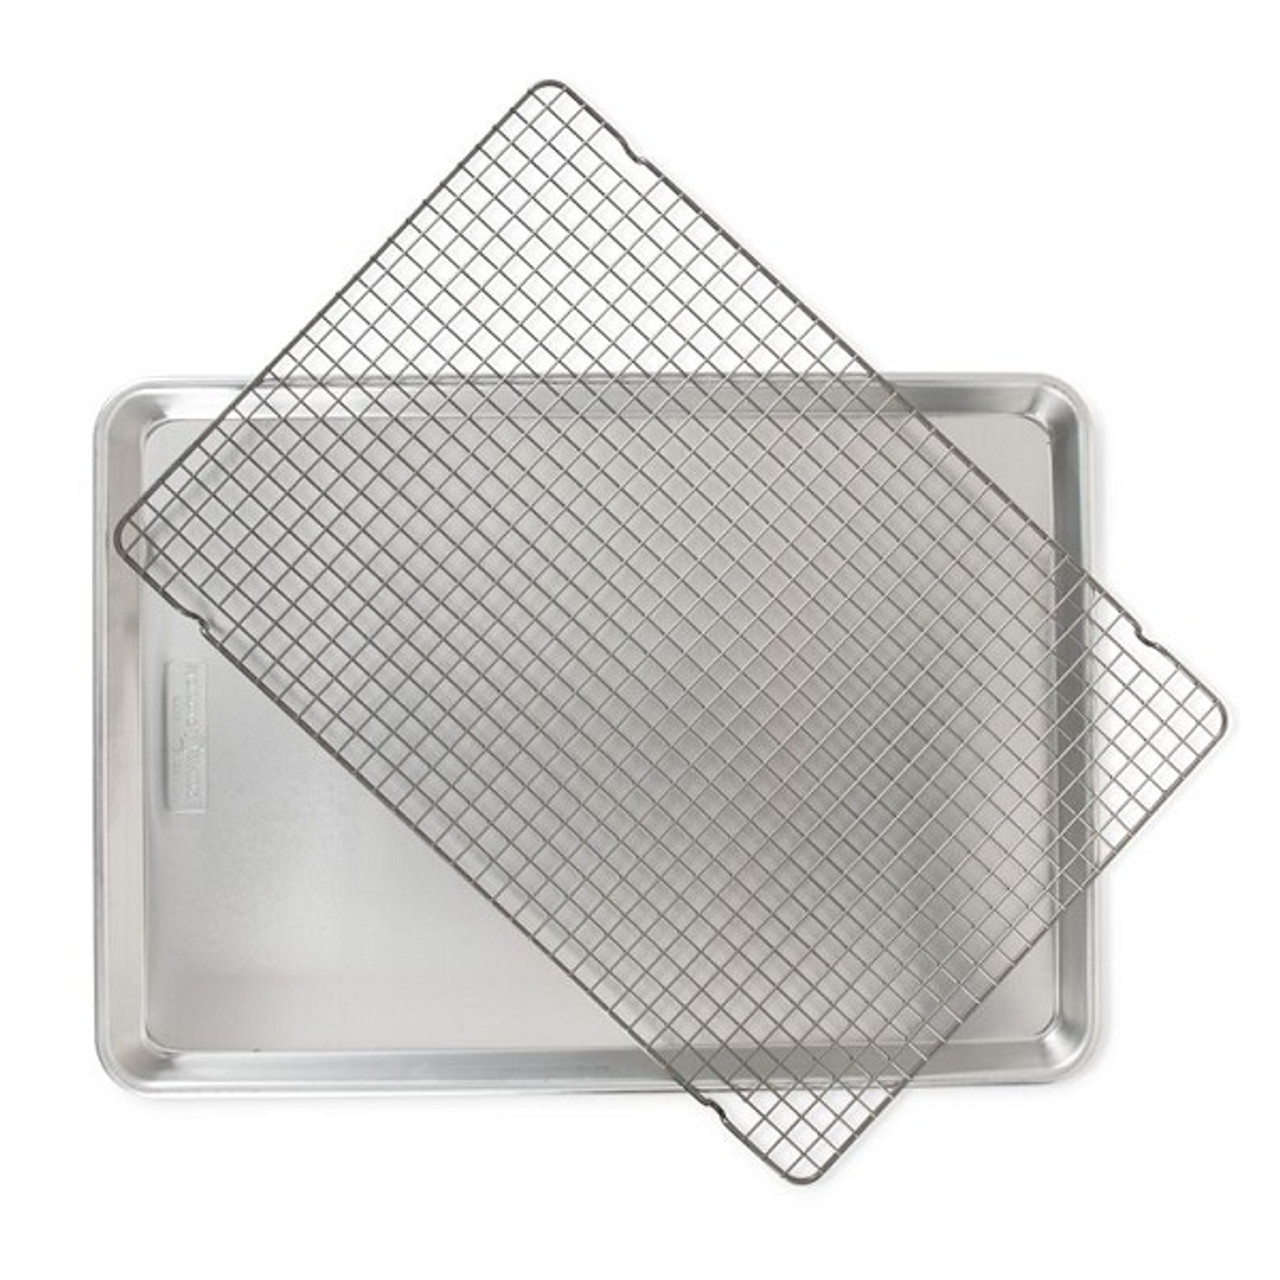 Nordic Ware Naturals Big Sheet Pan with Oven-Safe Grid